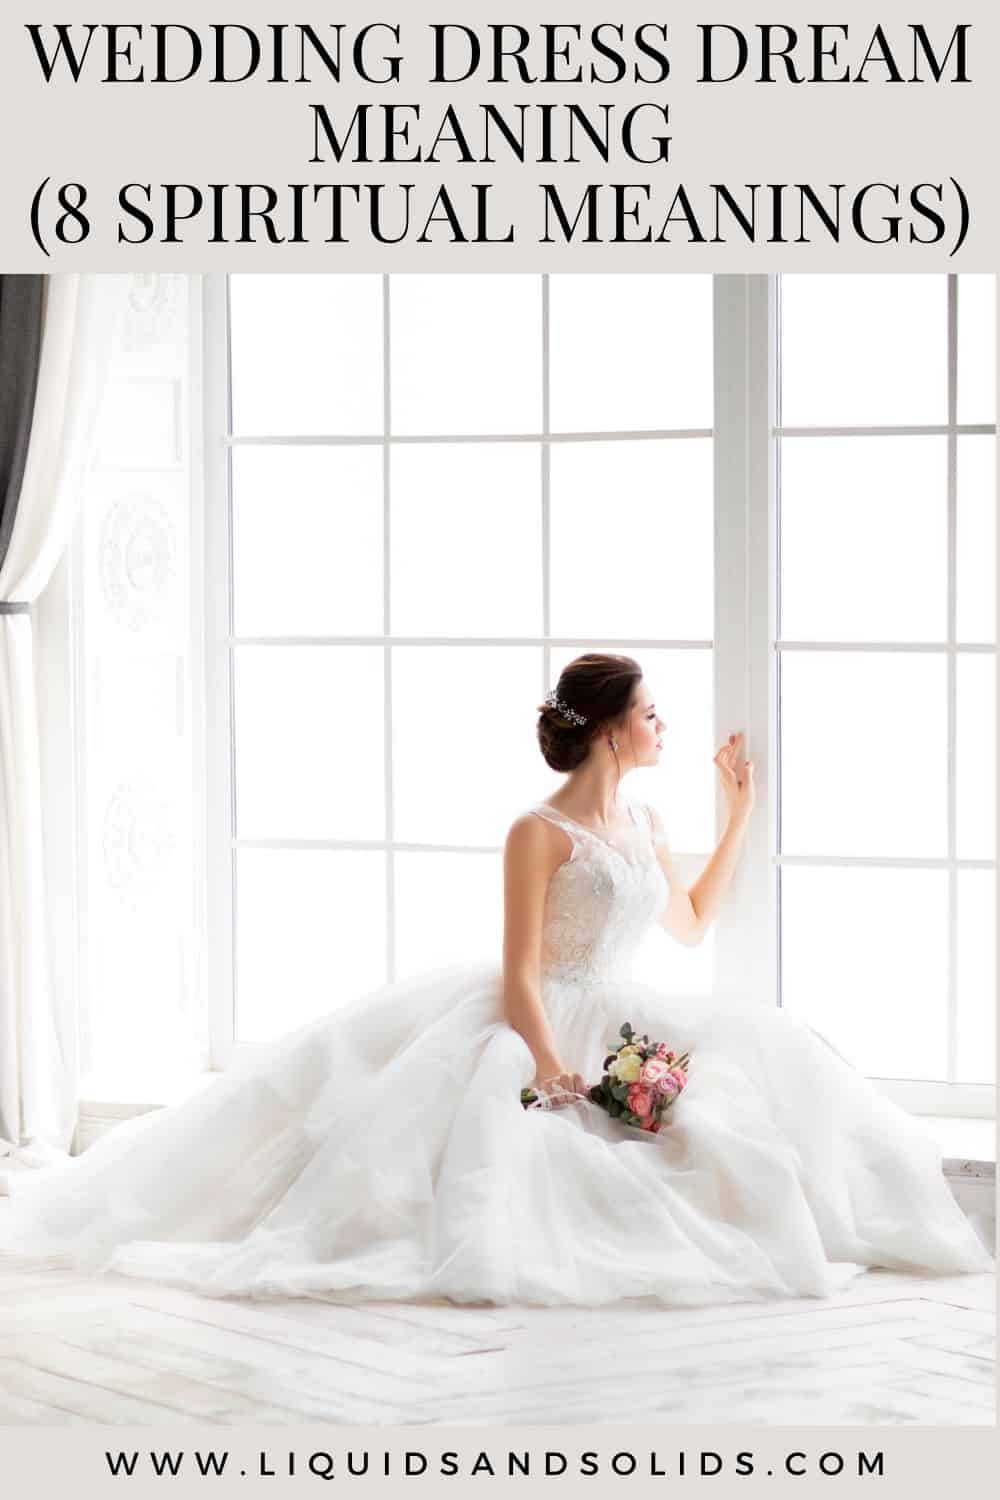 What does it mean when you dream about the wedding dress?